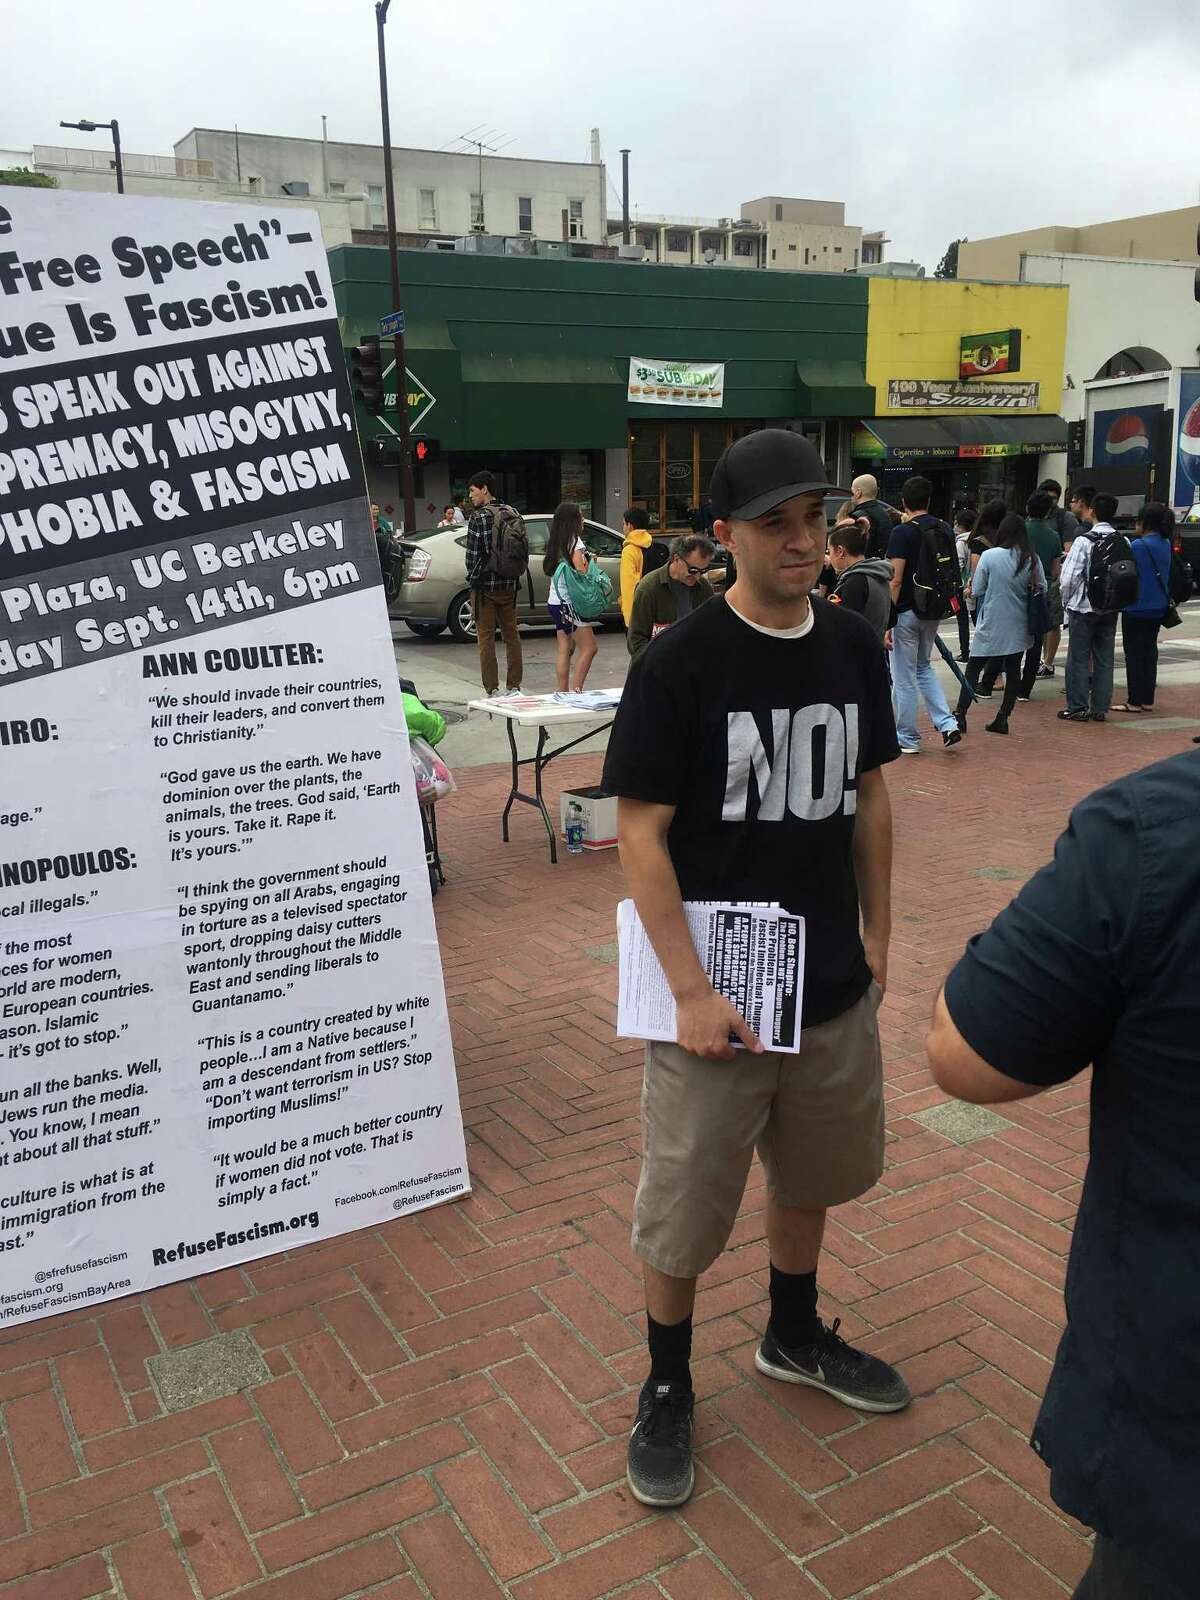 An unidentified critic of Ben Shapiro passes out posters s a day before the conservative commentator is scheduled to speak on campus on Wednesday September 13, 2017 in Berkeley.